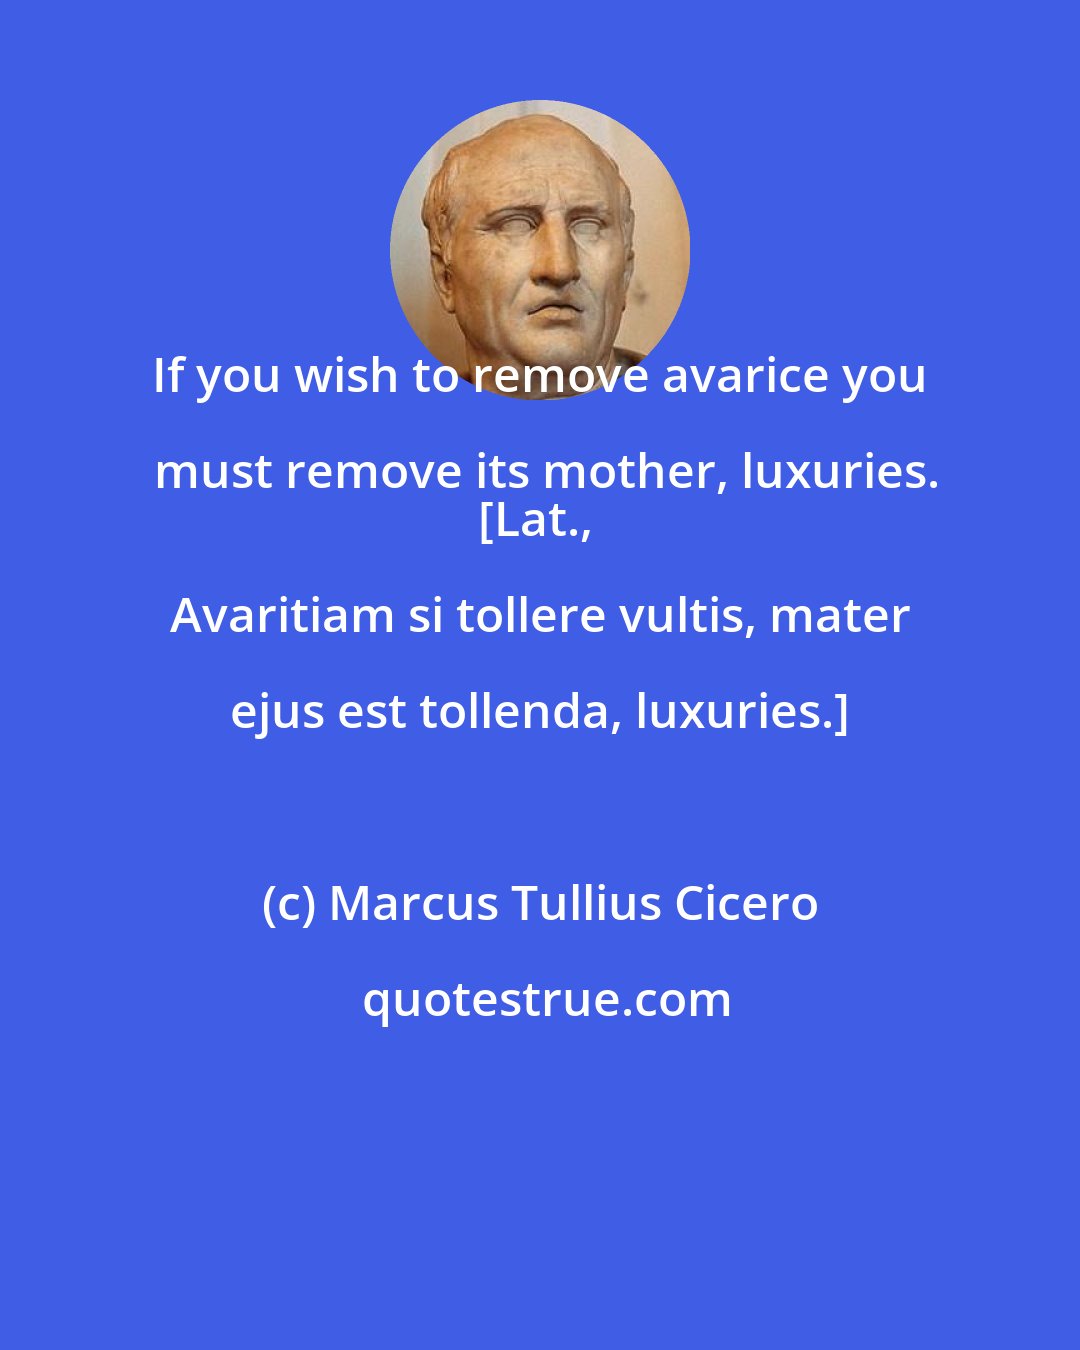 Marcus Tullius Cicero: If you wish to remove avarice you must remove its mother, luxuries.
[Lat., Avaritiam si tollere vultis, mater ejus est tollenda, luxuries.]